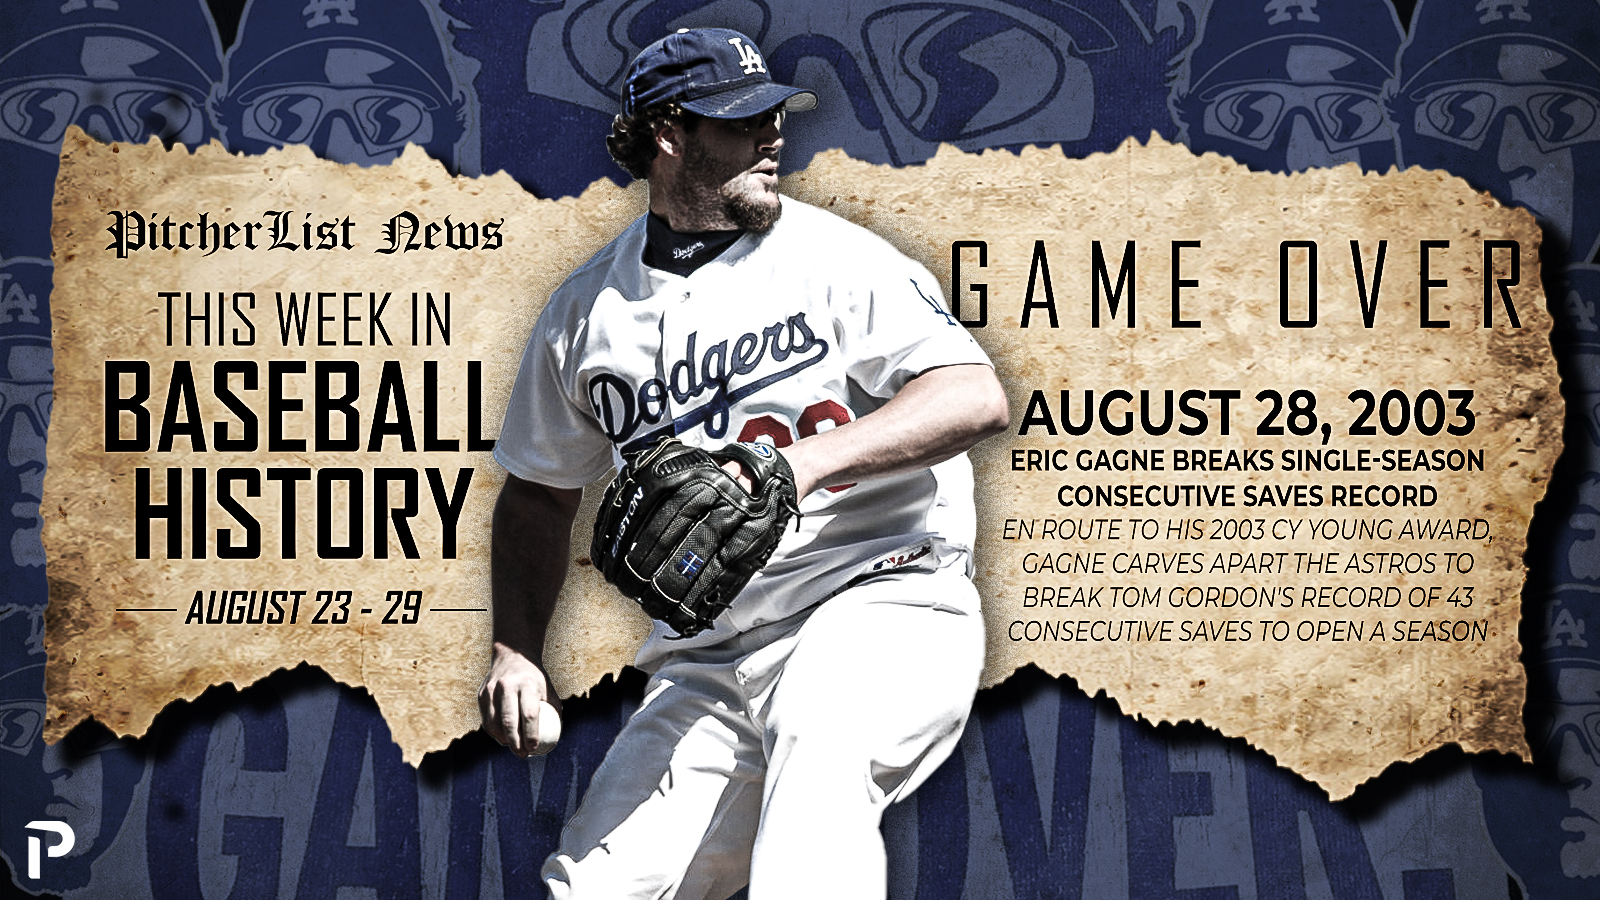 This Week in Baseball History: Aug. 23 - 29